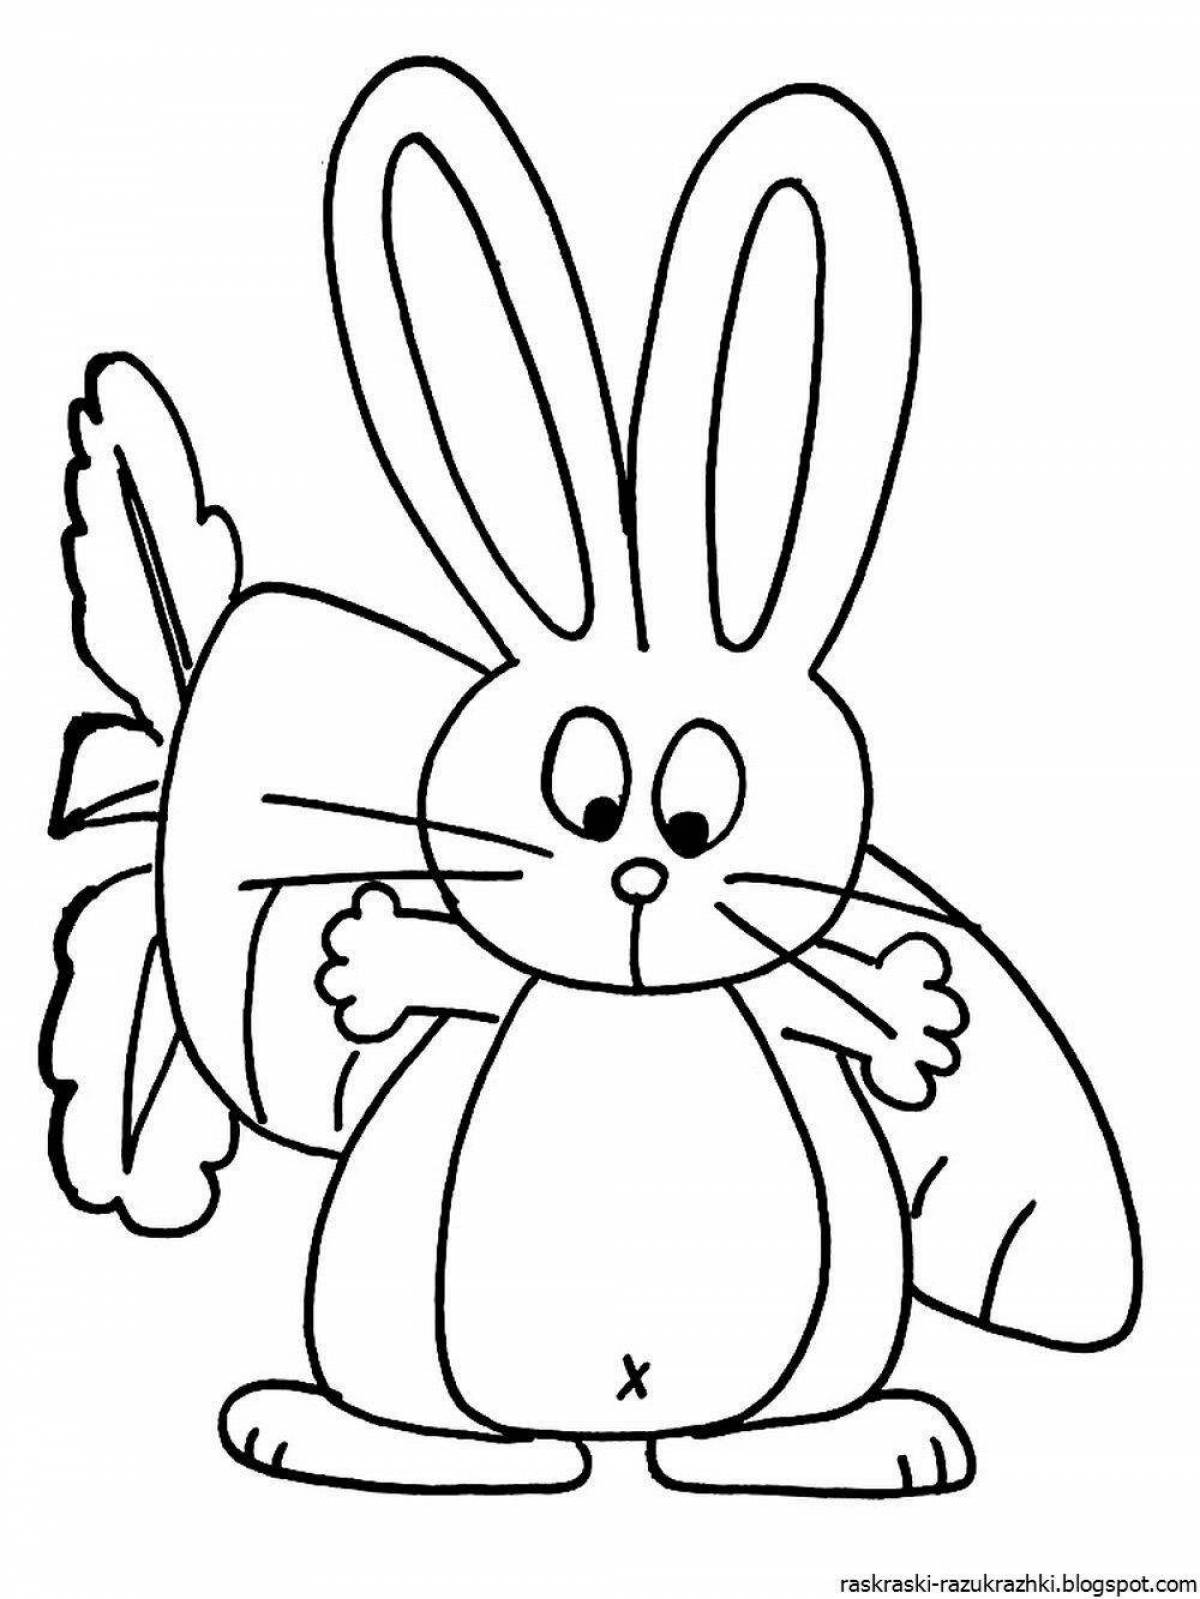 Amazing coloring pages for kids